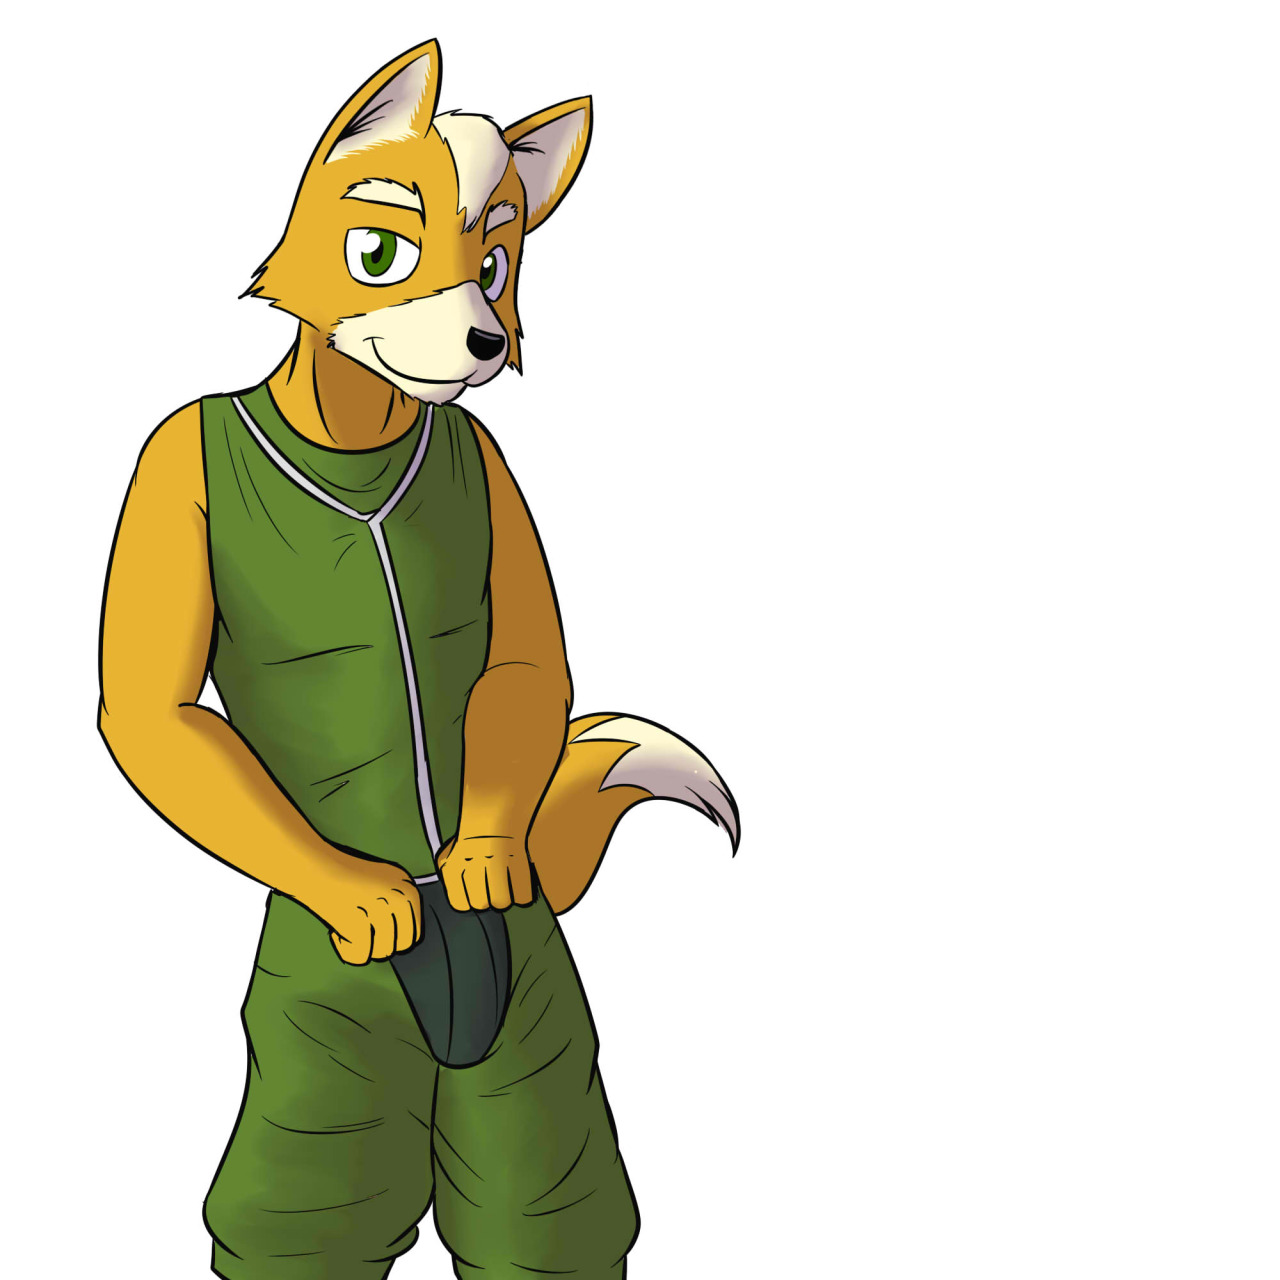 Fox McCloud - Dress Up I rather like how this one came out.